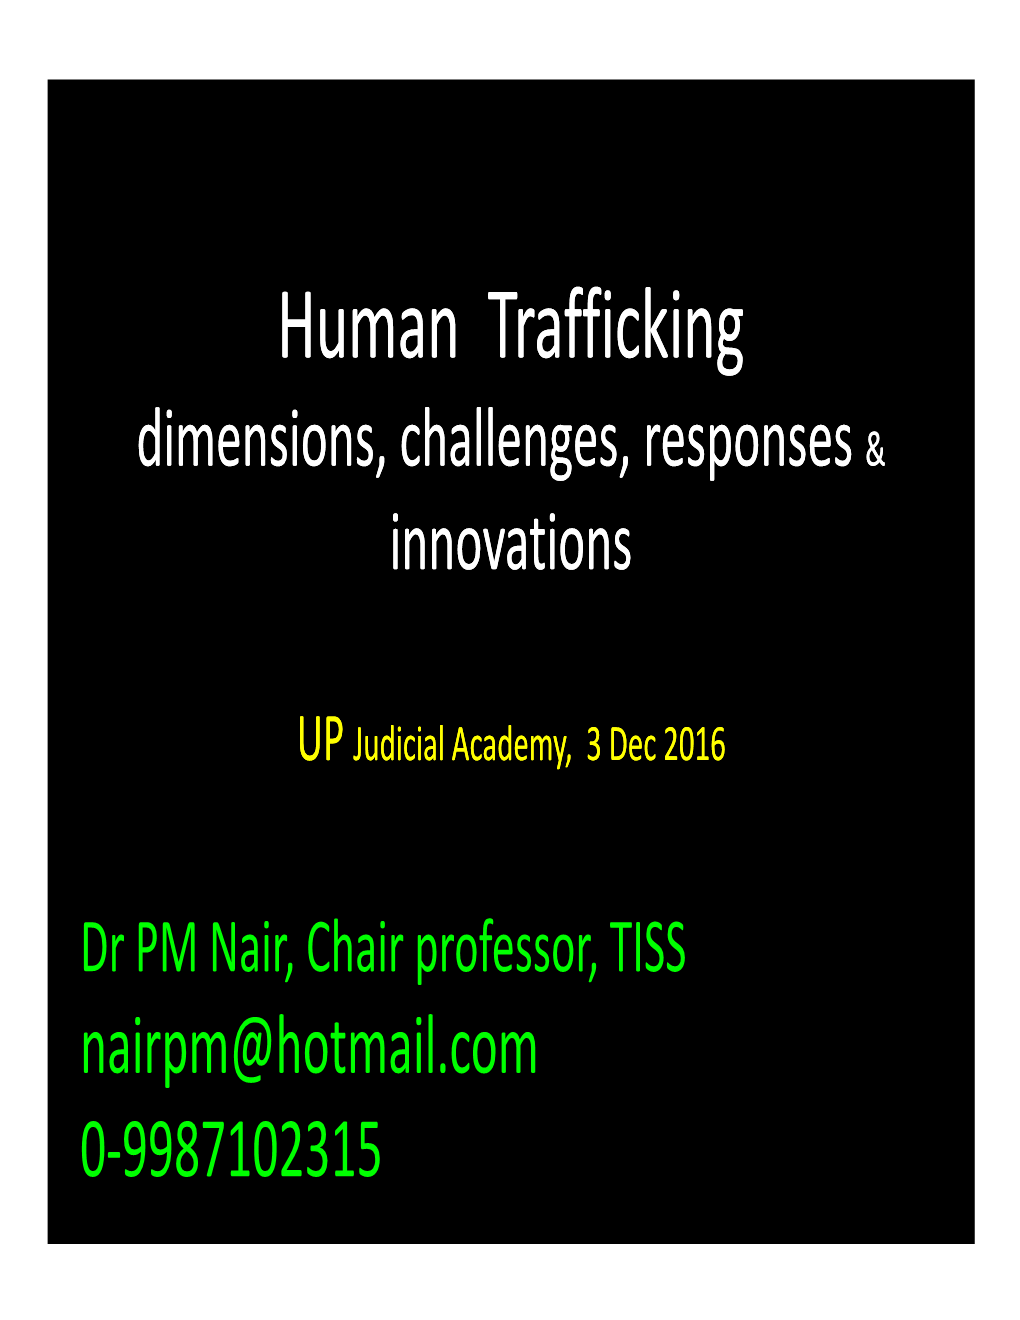 Human Trafficking Dimensions, Challenges, Responses && Innovations